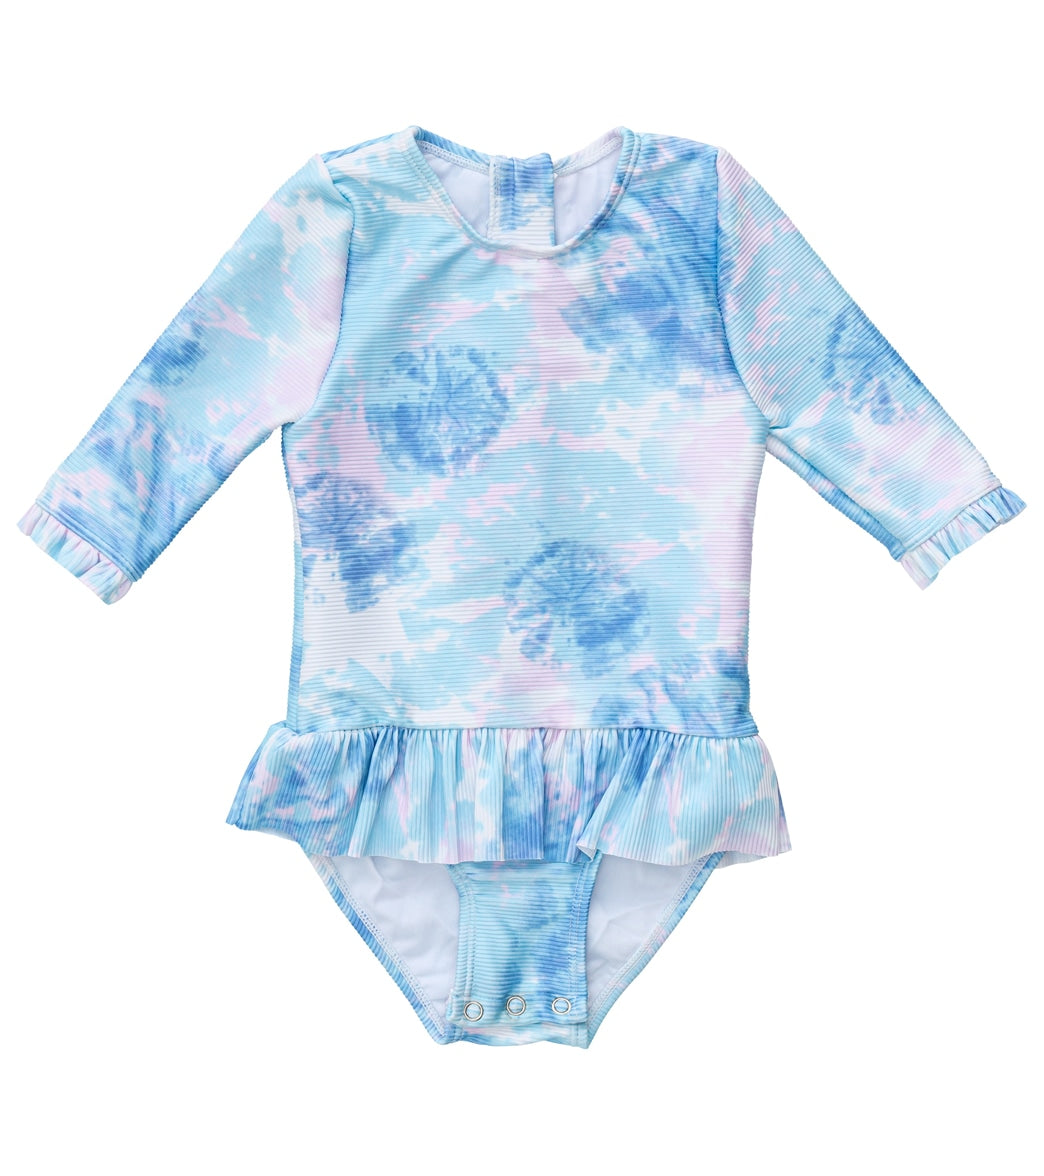 Snapper Rock Girls' Sky Dye 3/4 Sleeve Surf Suit (Baby, Toddler) at ...